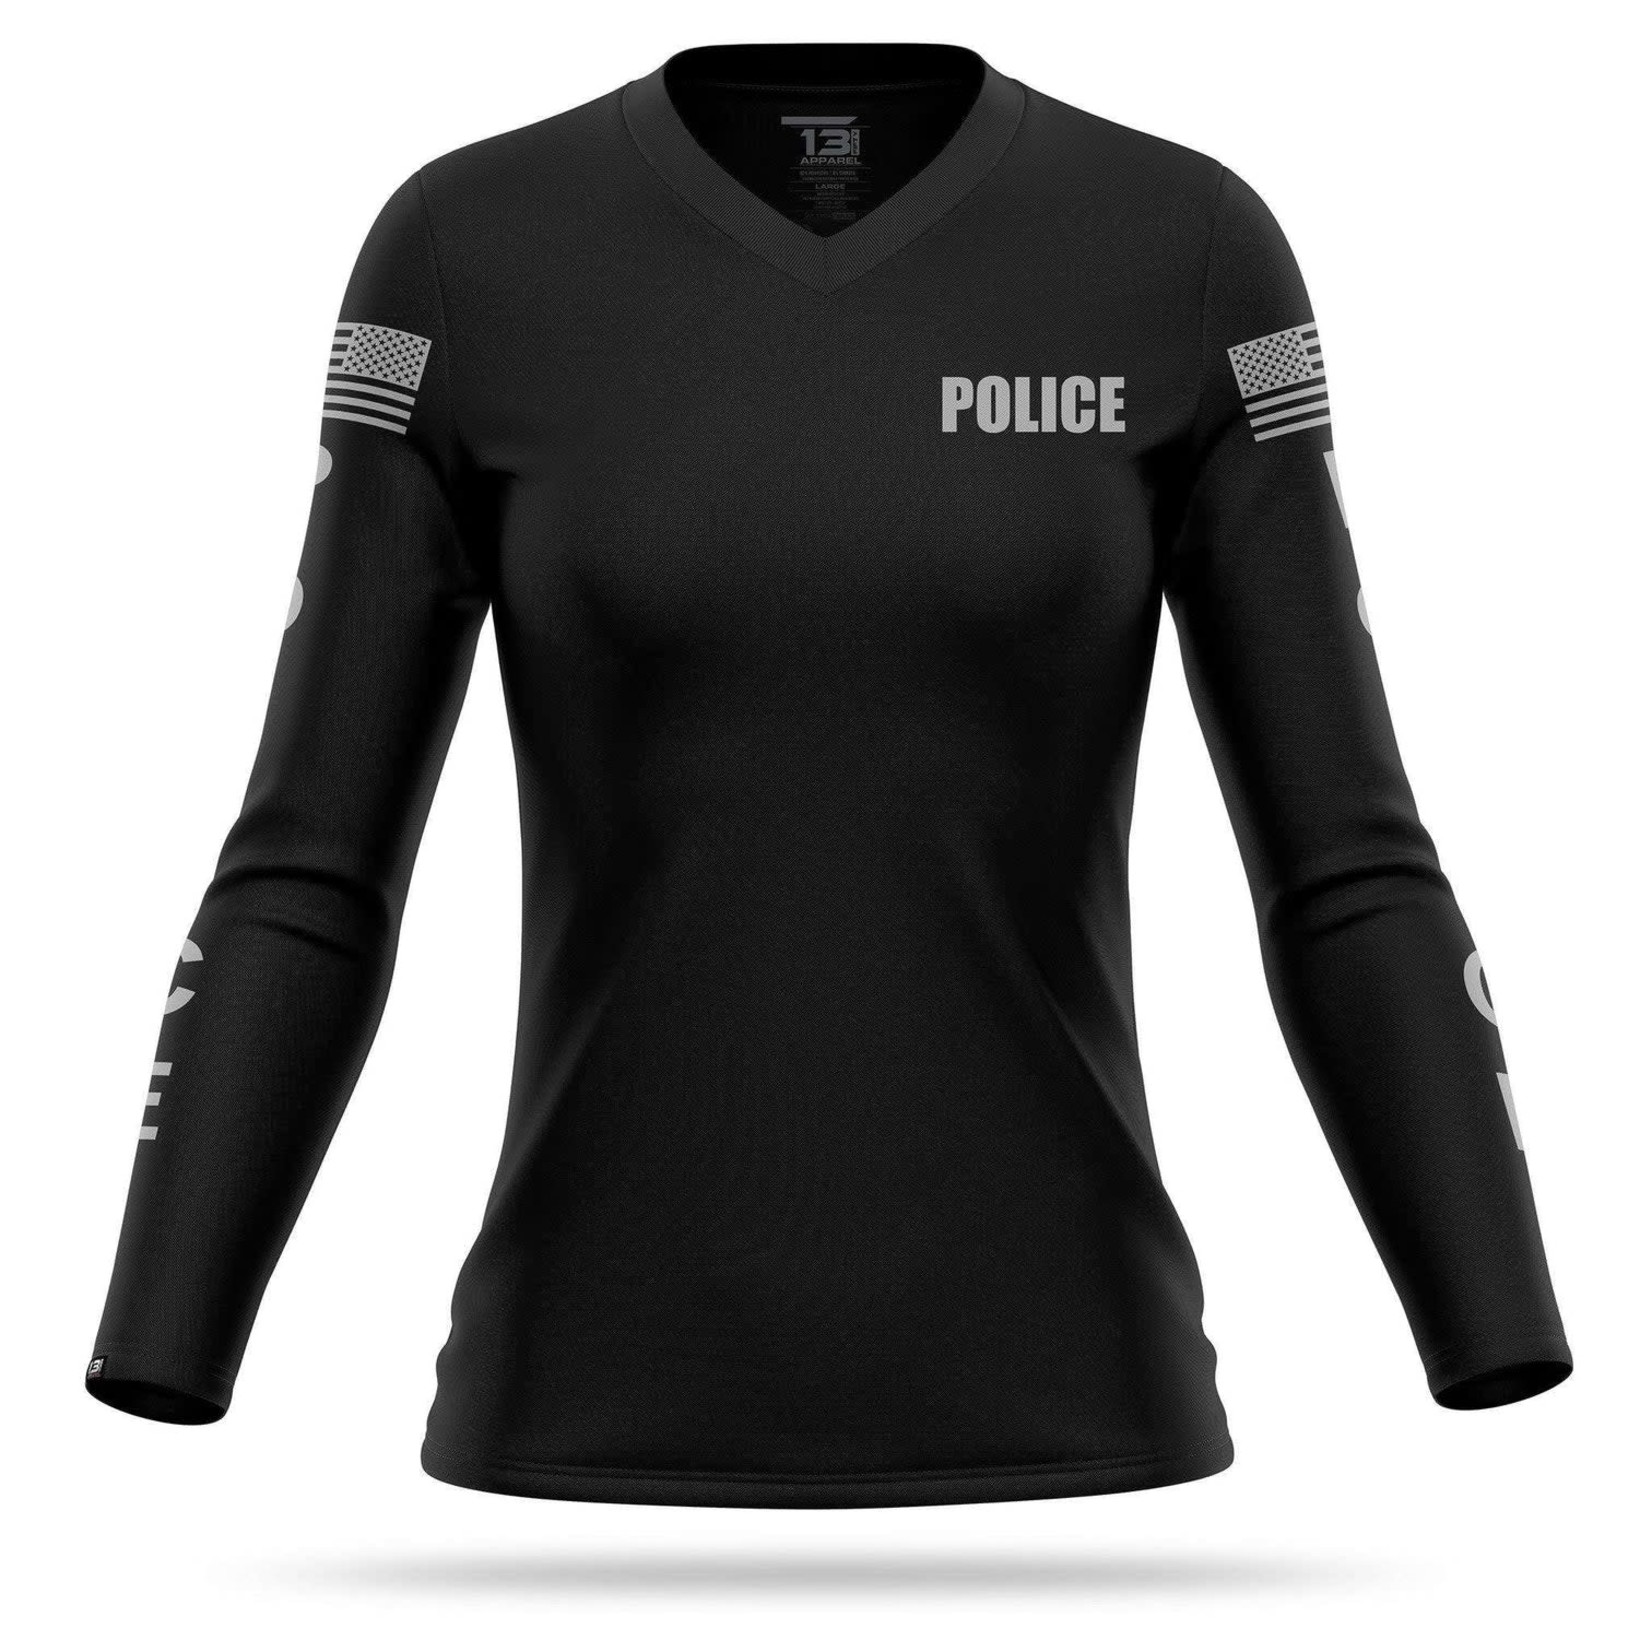 13 Fifty Apparel UNO WOMEN'S POLICE LONG SLEEVE